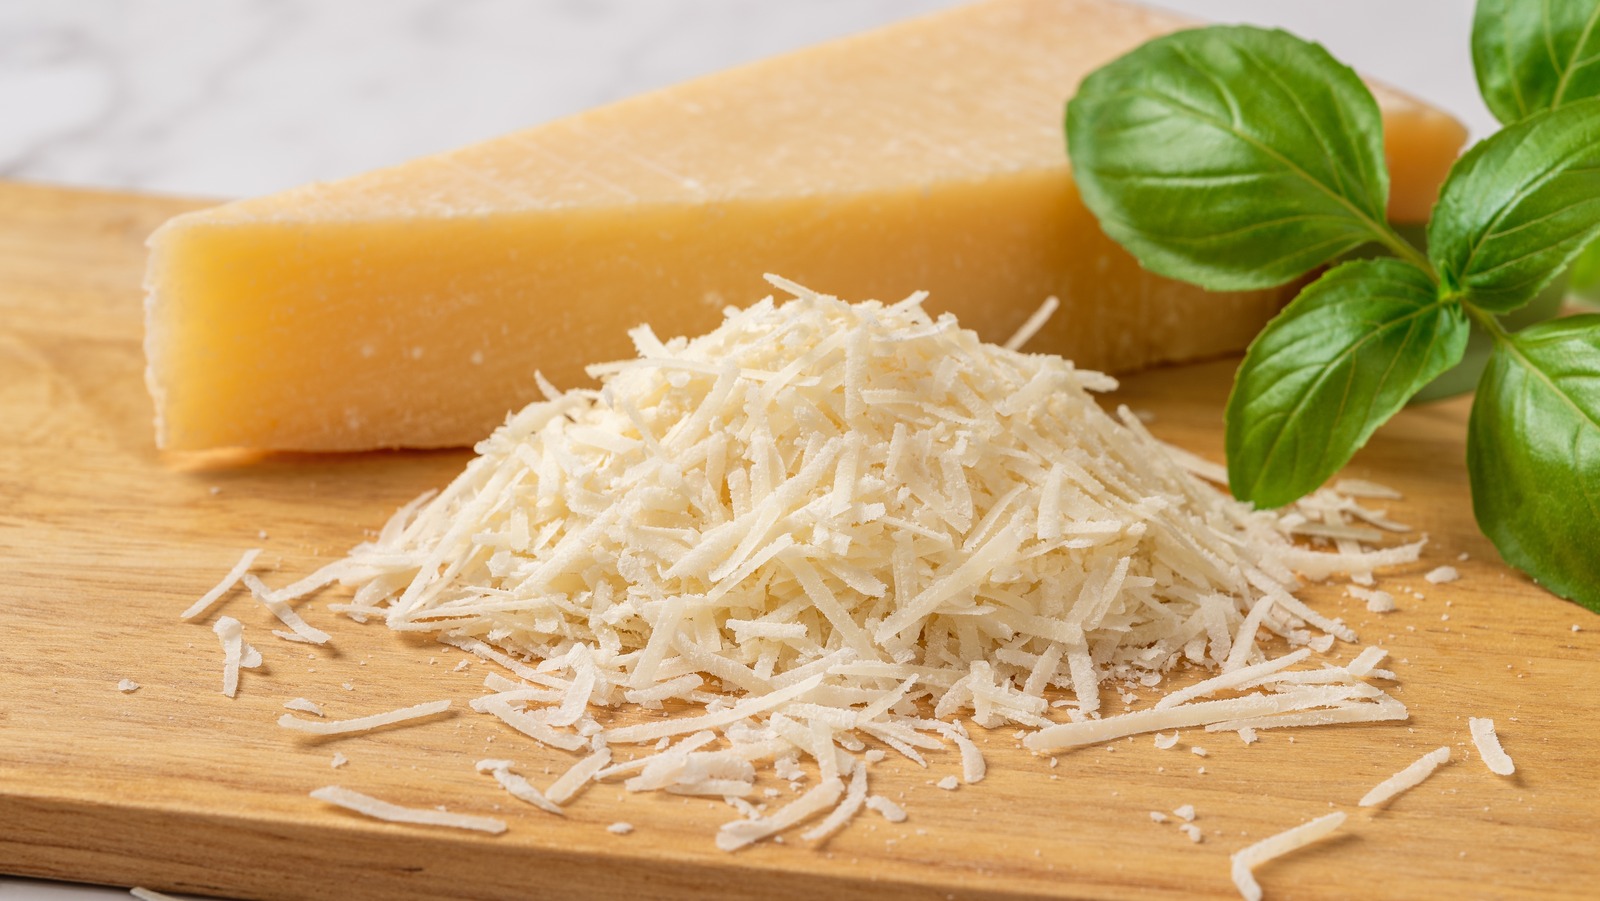 https://www.thedailymeal.com/img/gallery/olive-garden-sells-cheese-graters-and-pasta-night-will-never-be-the-same/l-intro-1697578630.jpg